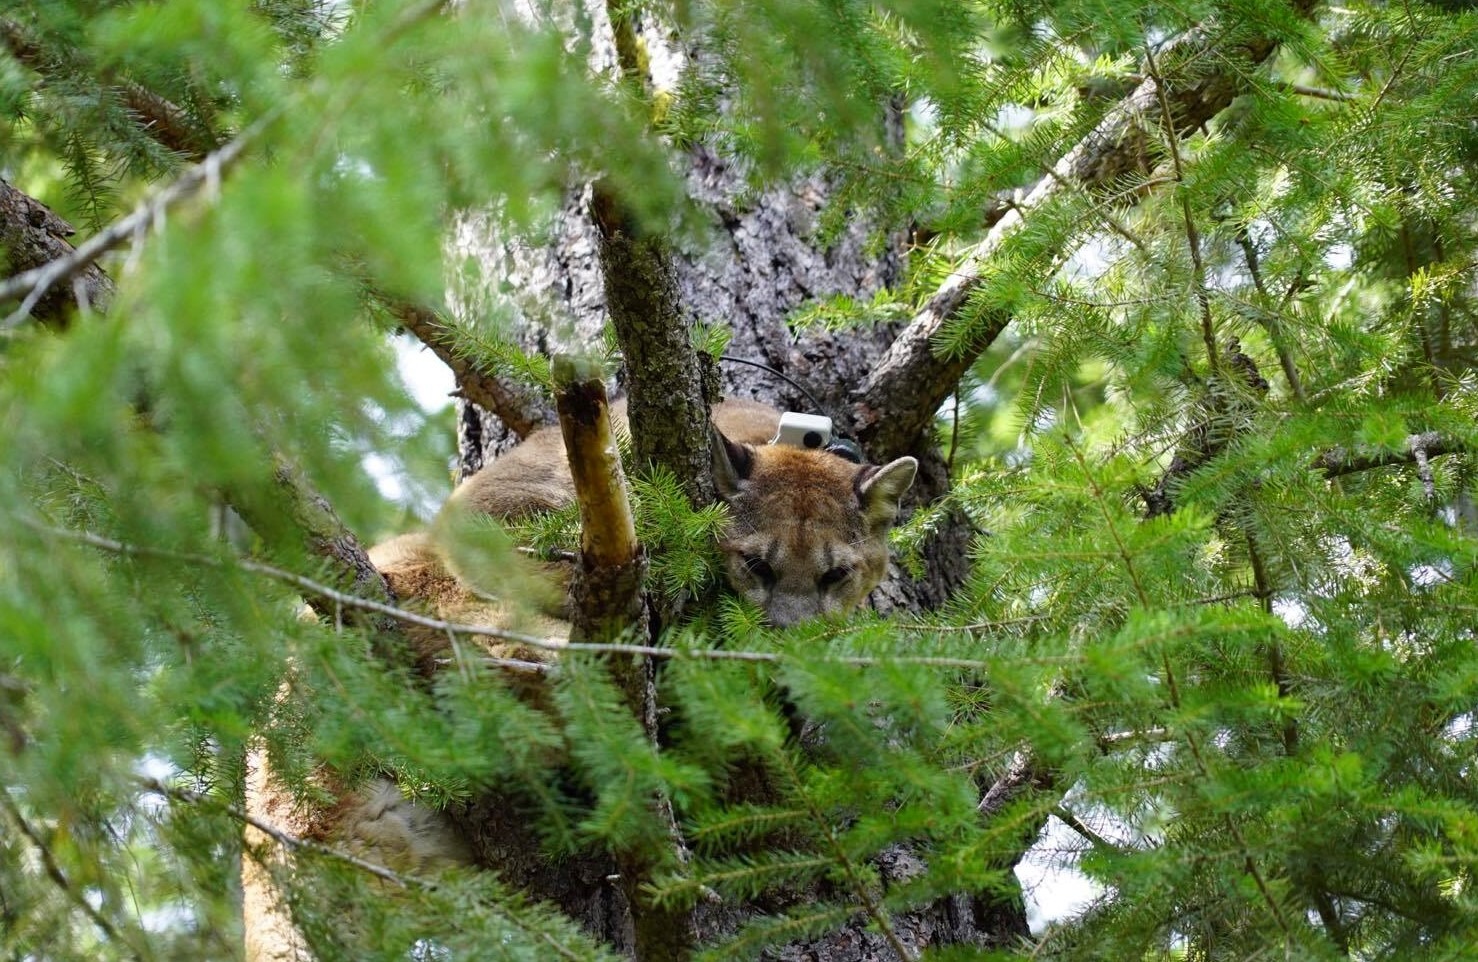 A young cougar, which was previously tagged with a tracking collar, is treed by hounds in Washington. Courtesy of Buddy Woodberry